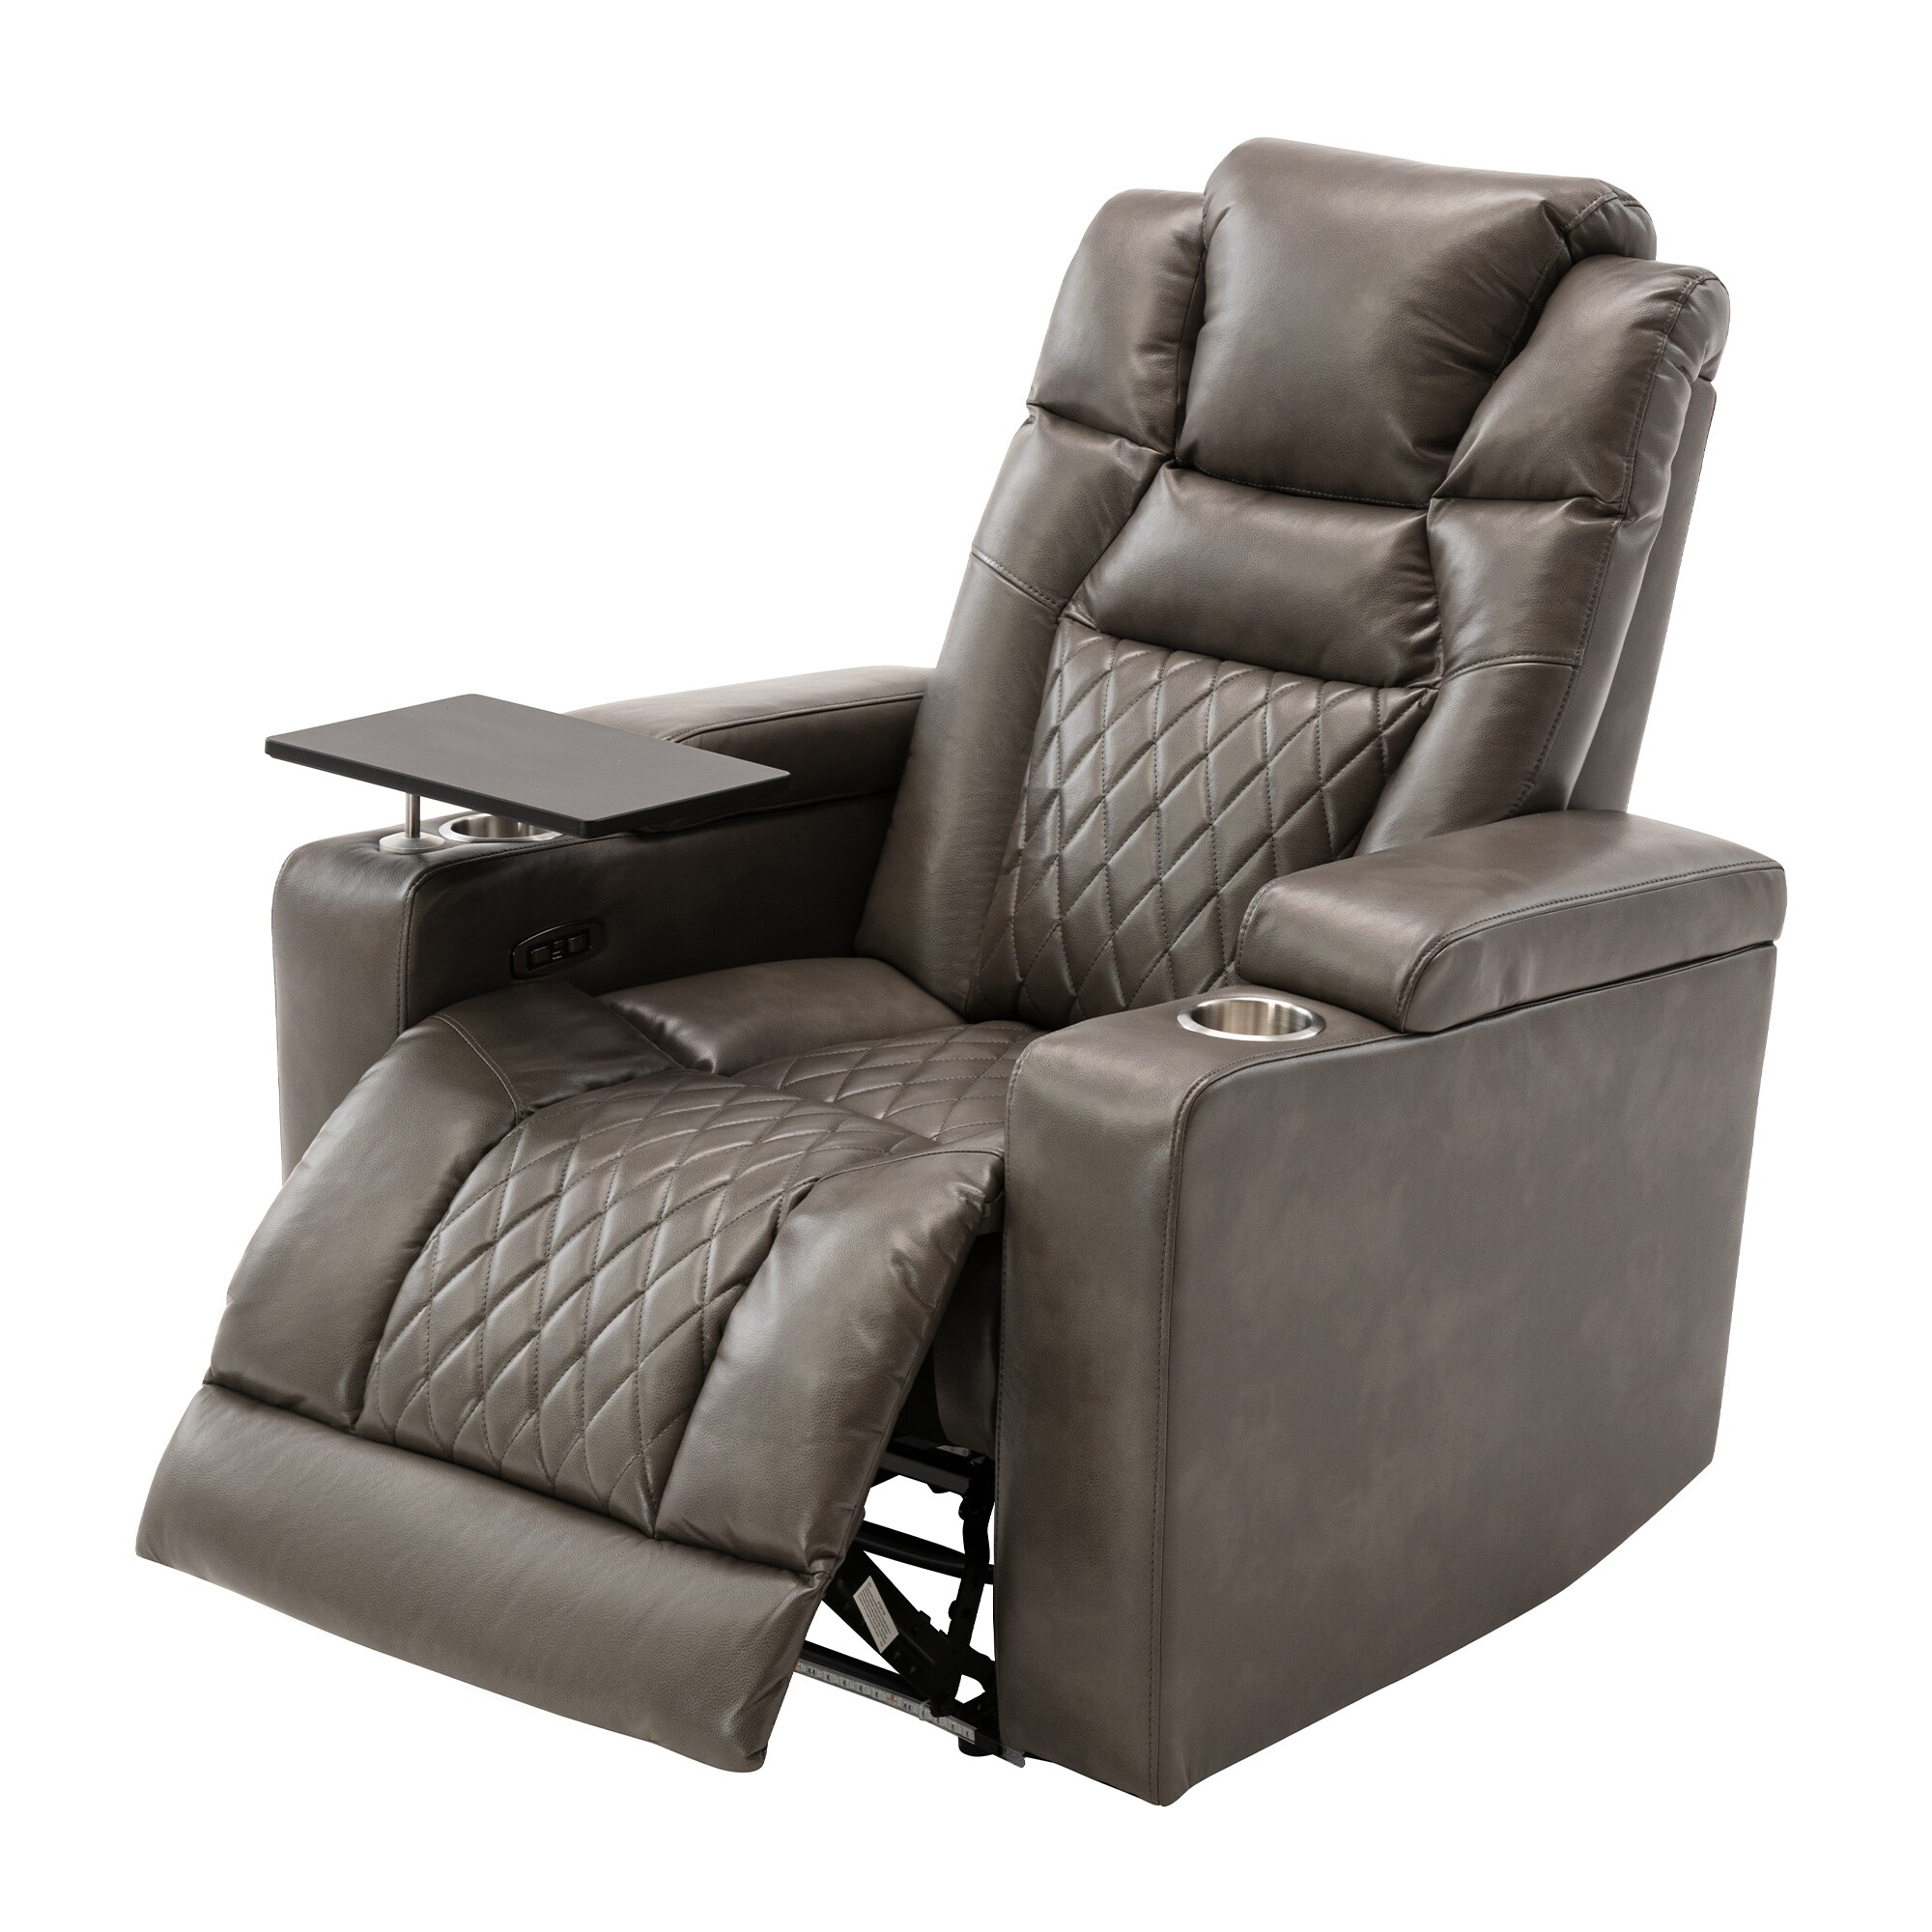 PU Leather Power Recliner with USB Charging Port and Swivel Tray Table, Hidden Arm Storage, Cup Holders, Home Theater Seating